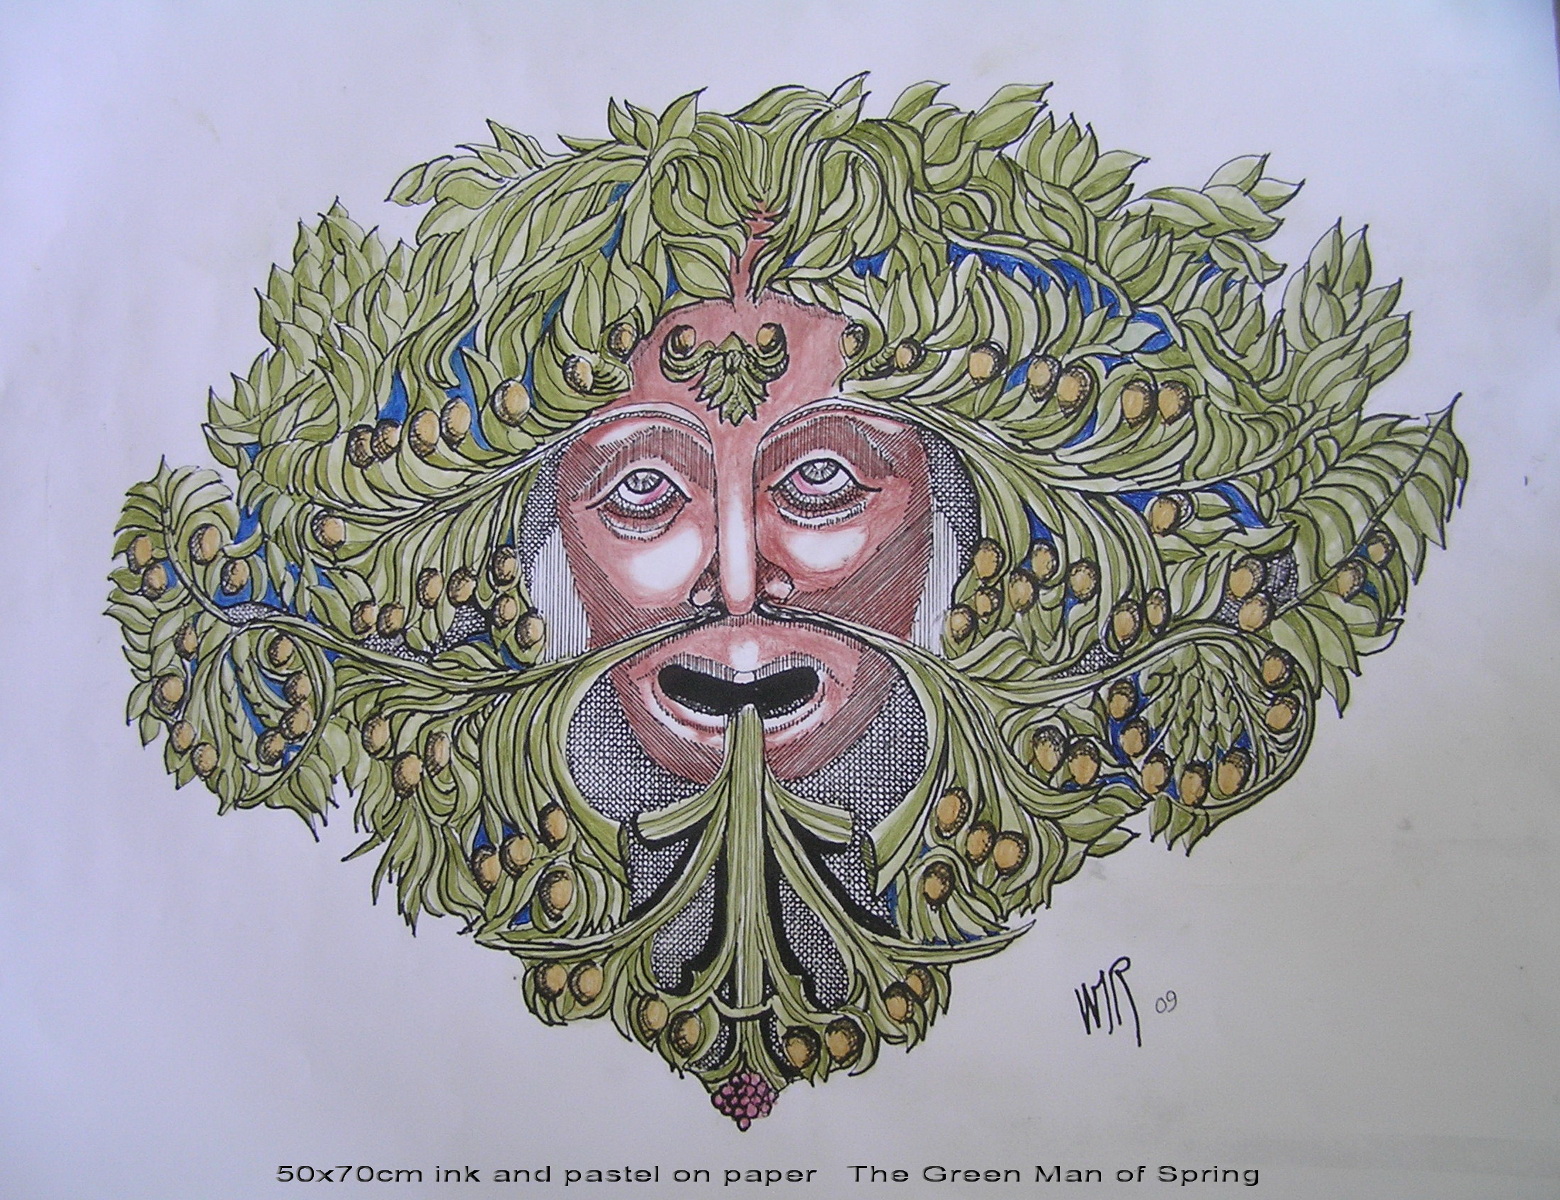 The Green Man of Spring